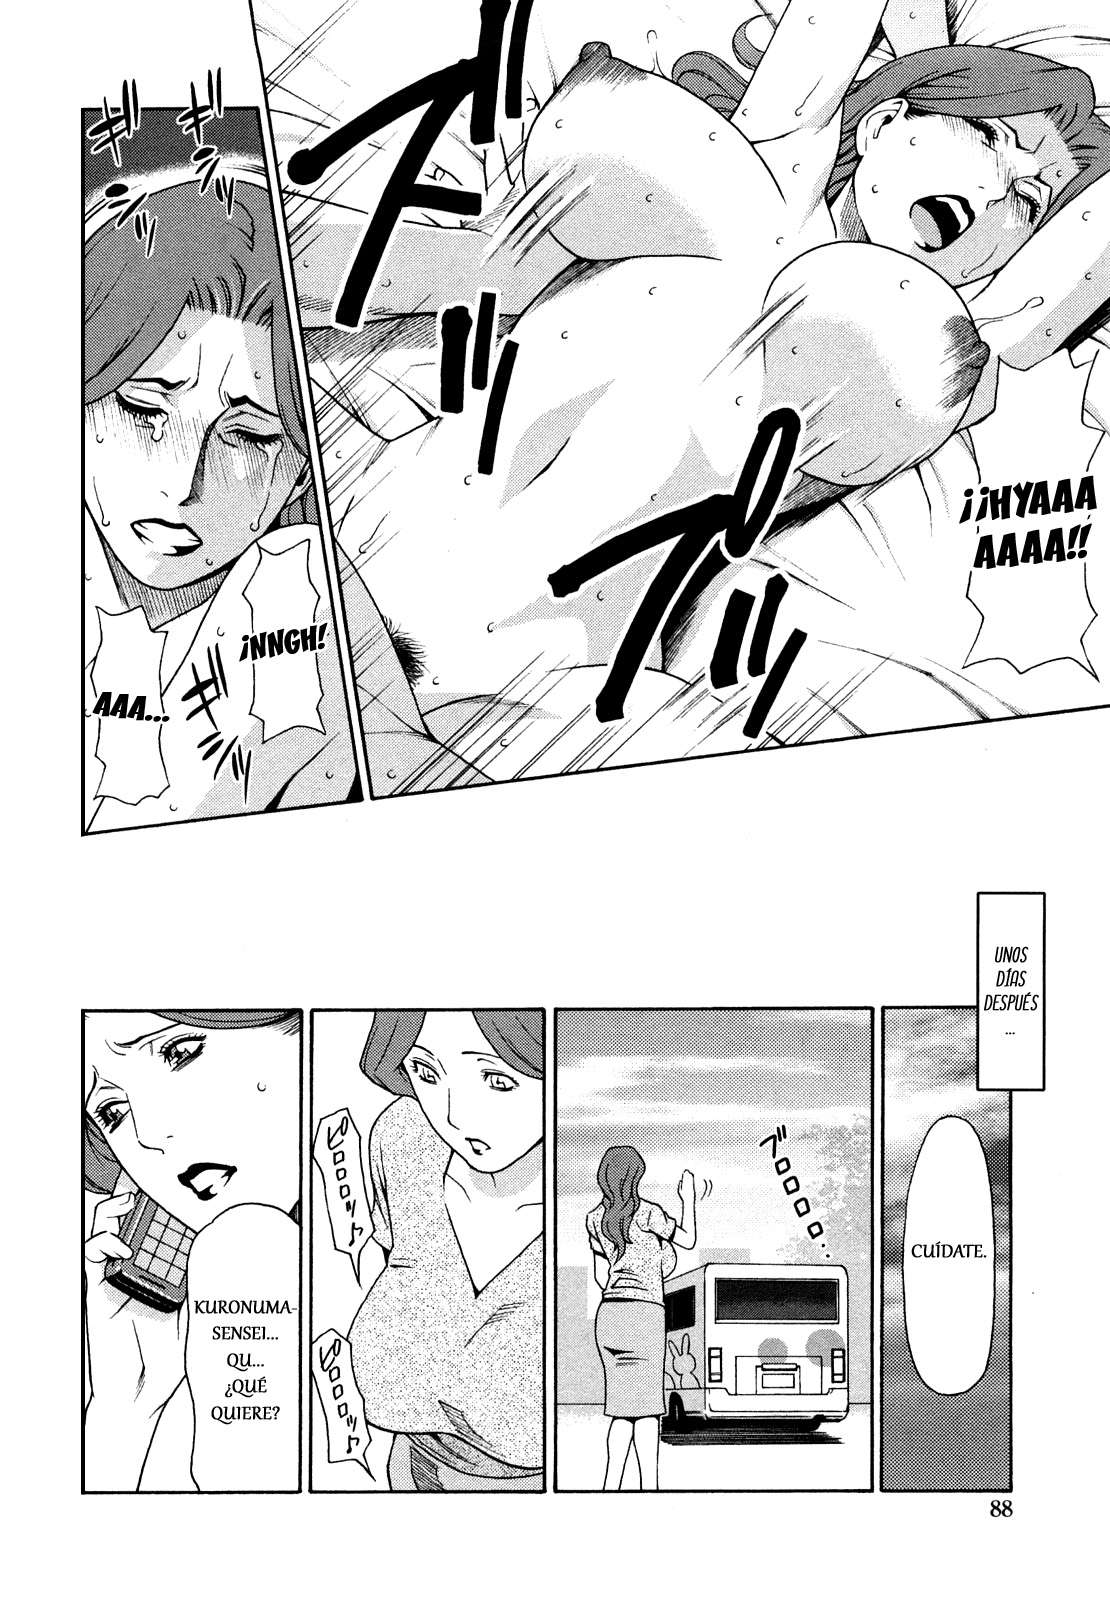 Immorality Love-Hole Completo (Sin Censura) Chapter-6 - 5